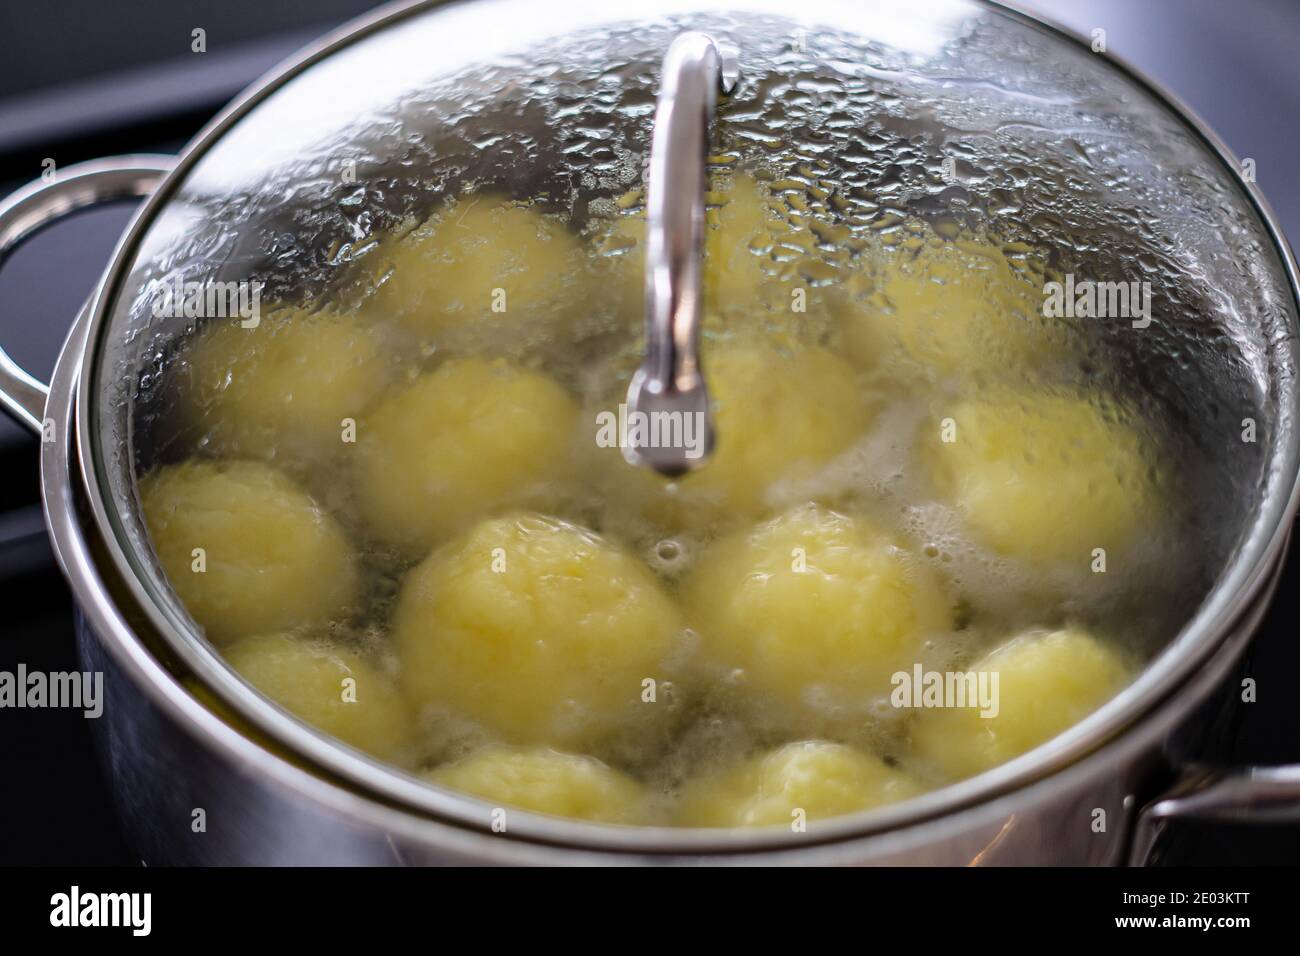 Dumplings simmering in a pot with closed lid Stock Photo